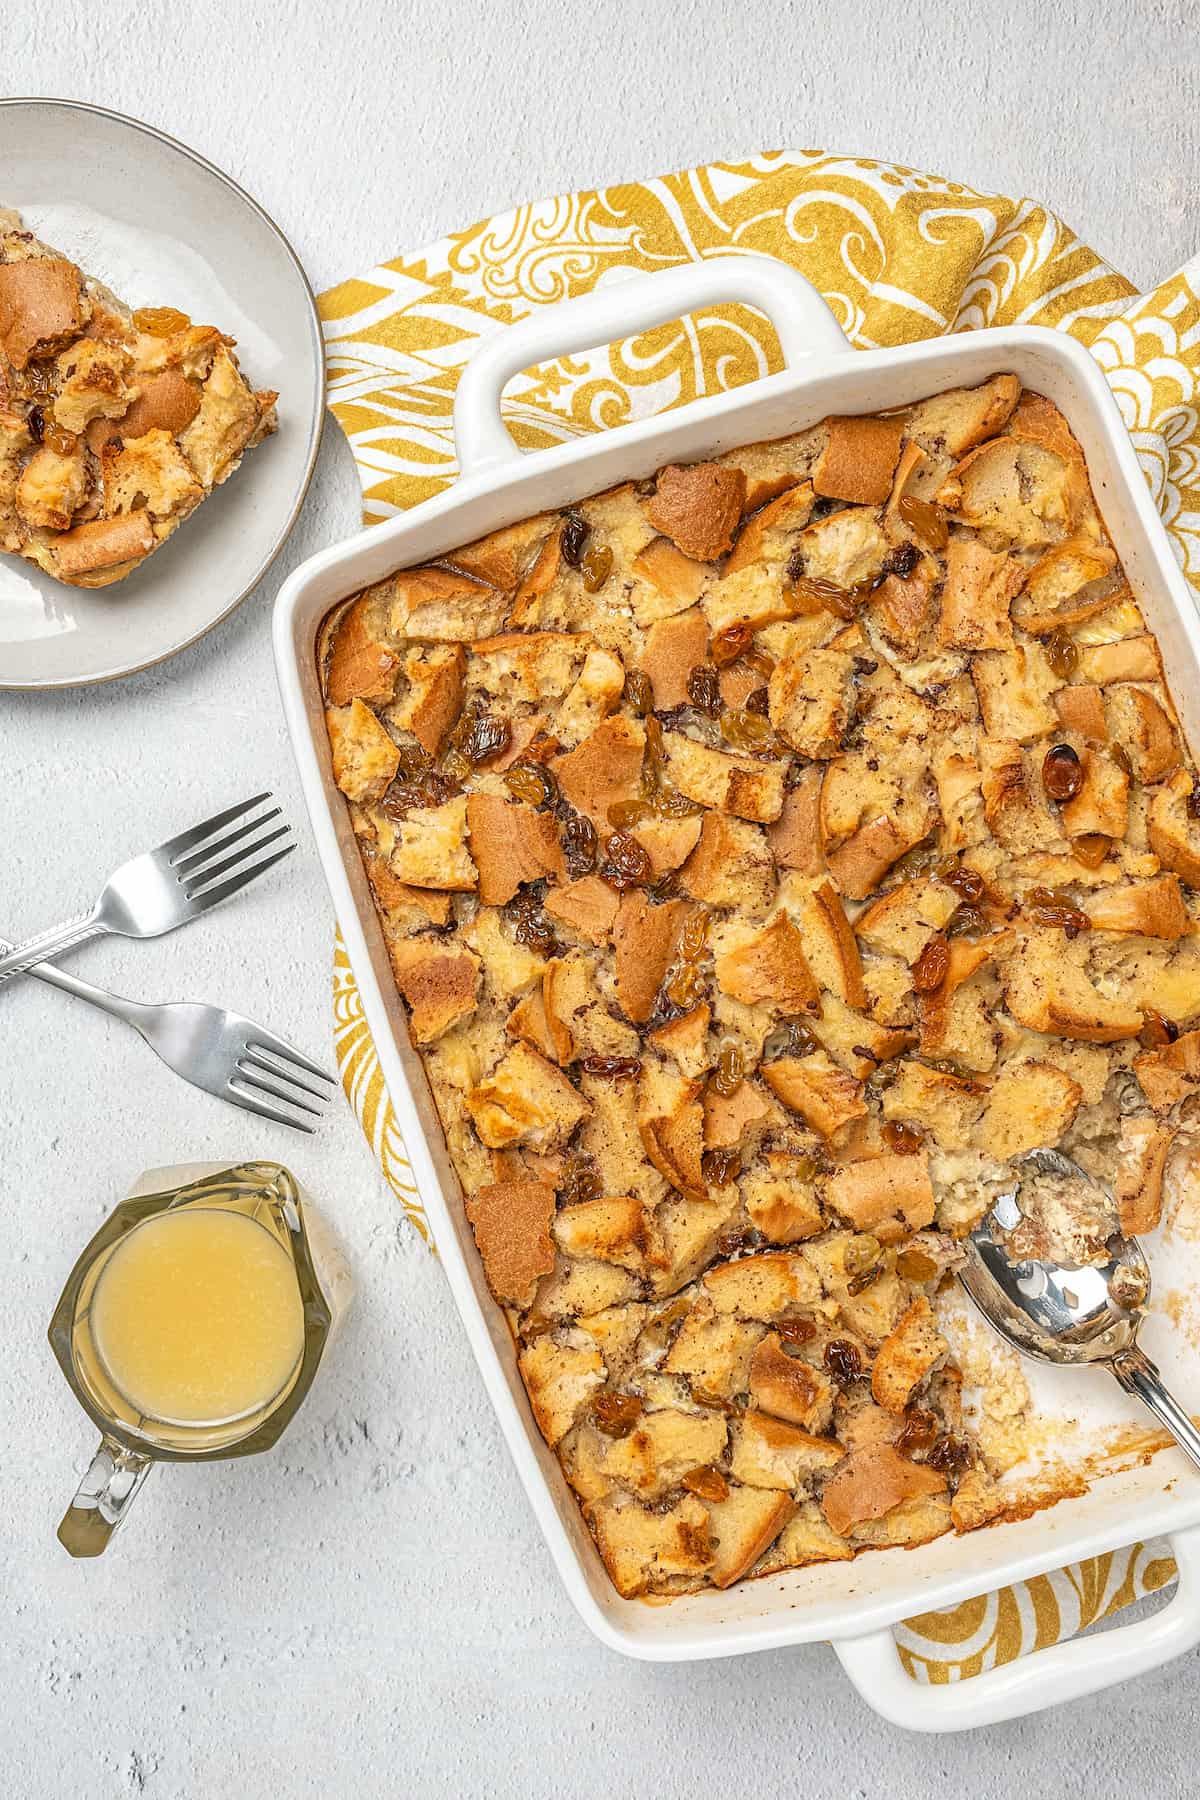 Overhead view of bread pudding in a baking dish next to a serving of bread pudding on a plate, next to a pourer with bourbon sauce.